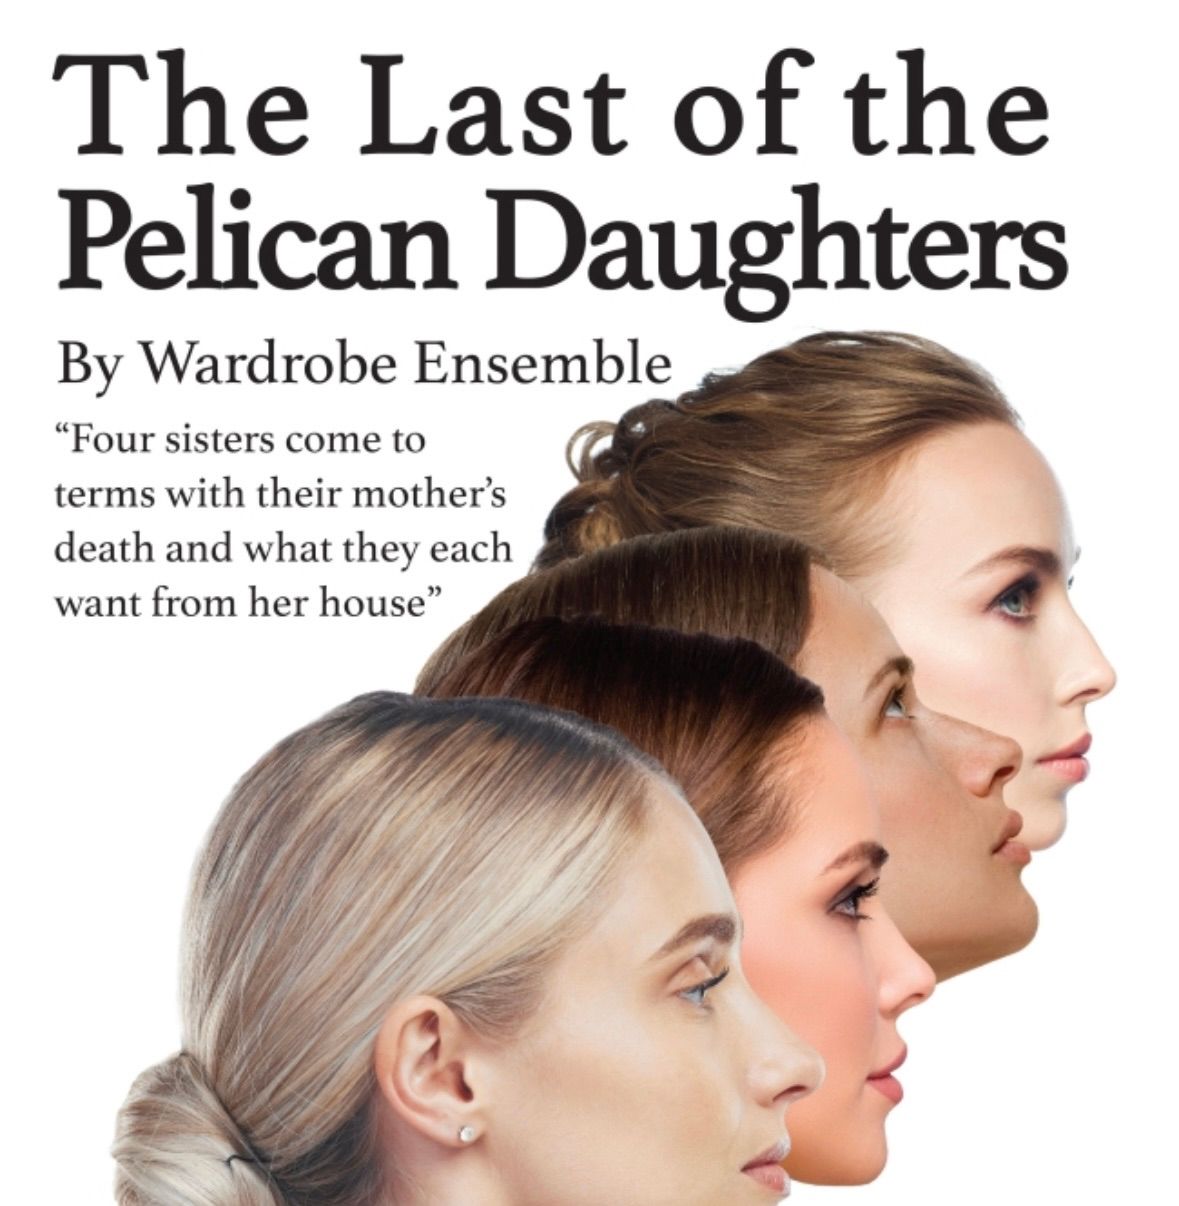 The Last of the Pelican Daughters